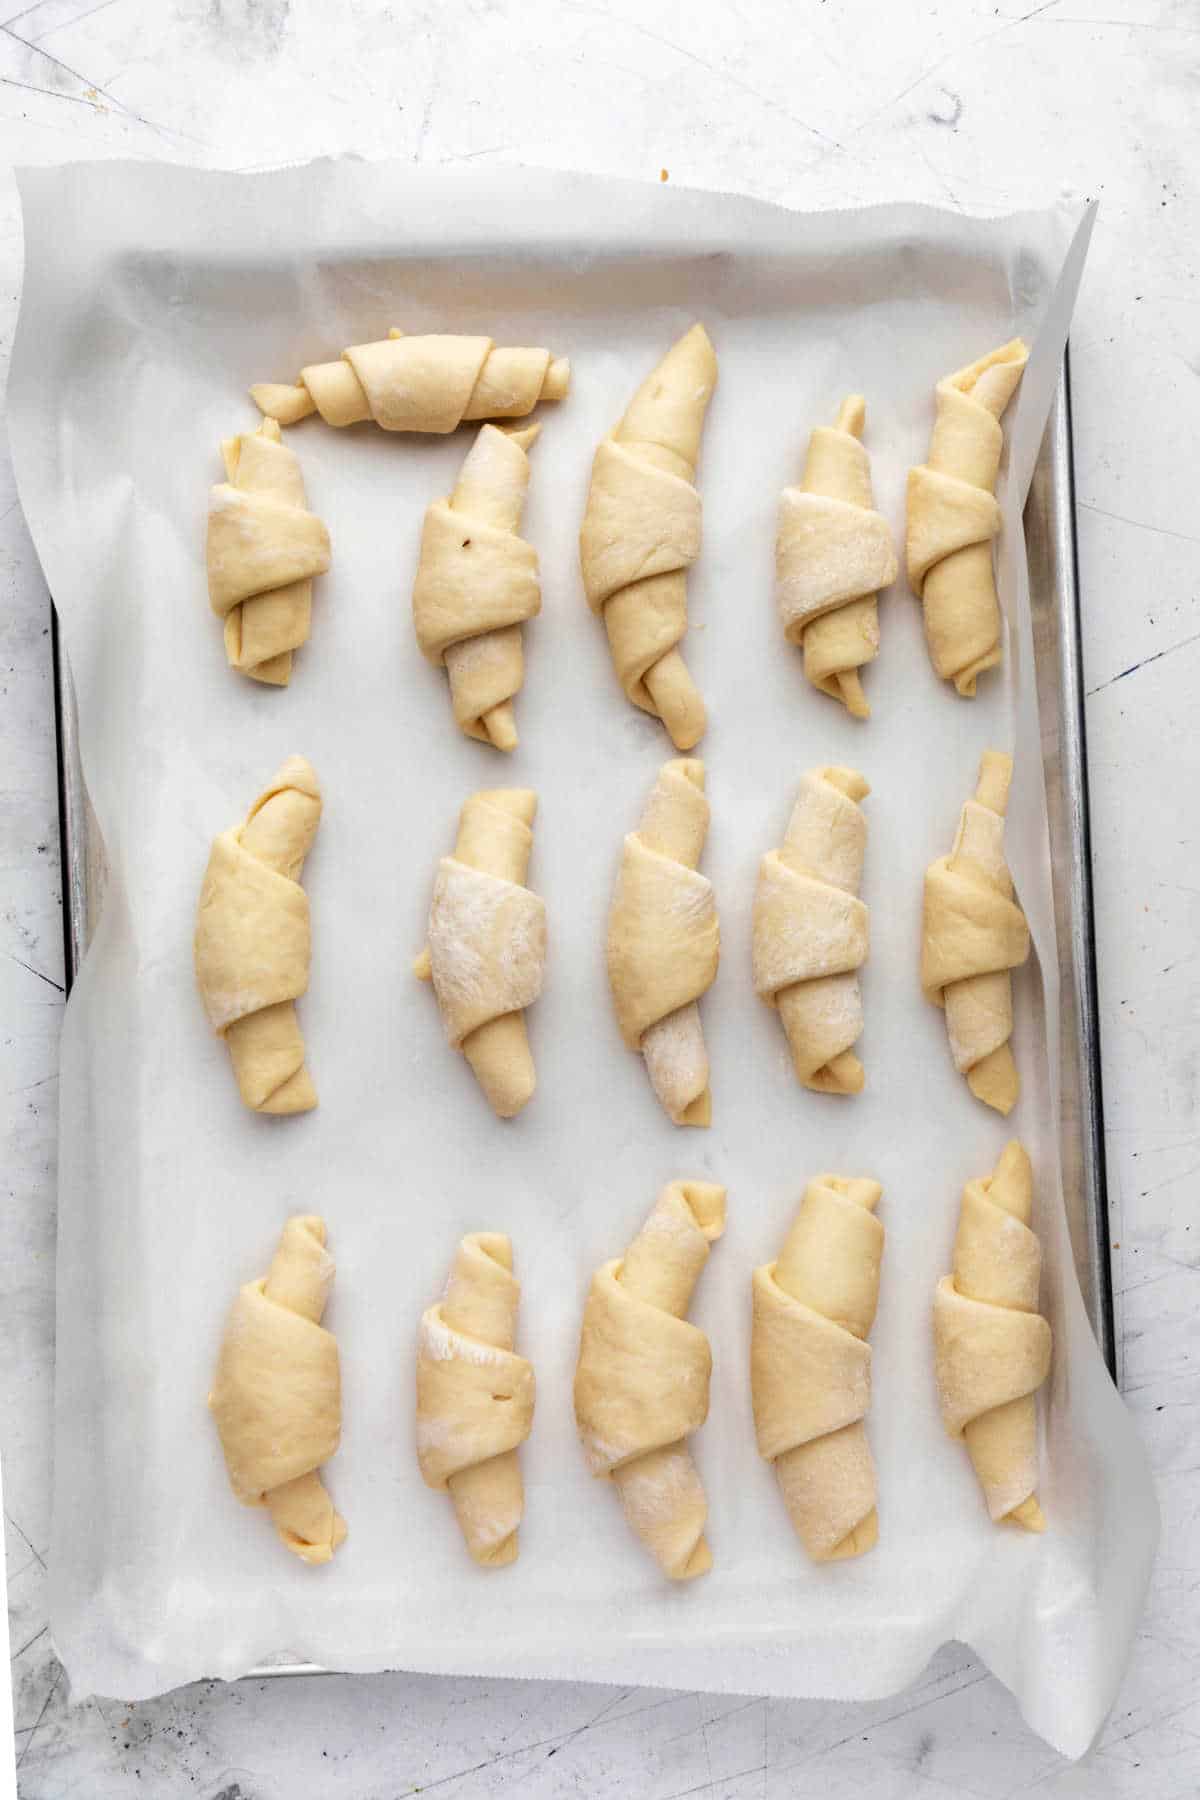 Risen crescent rolls on a baking tray.